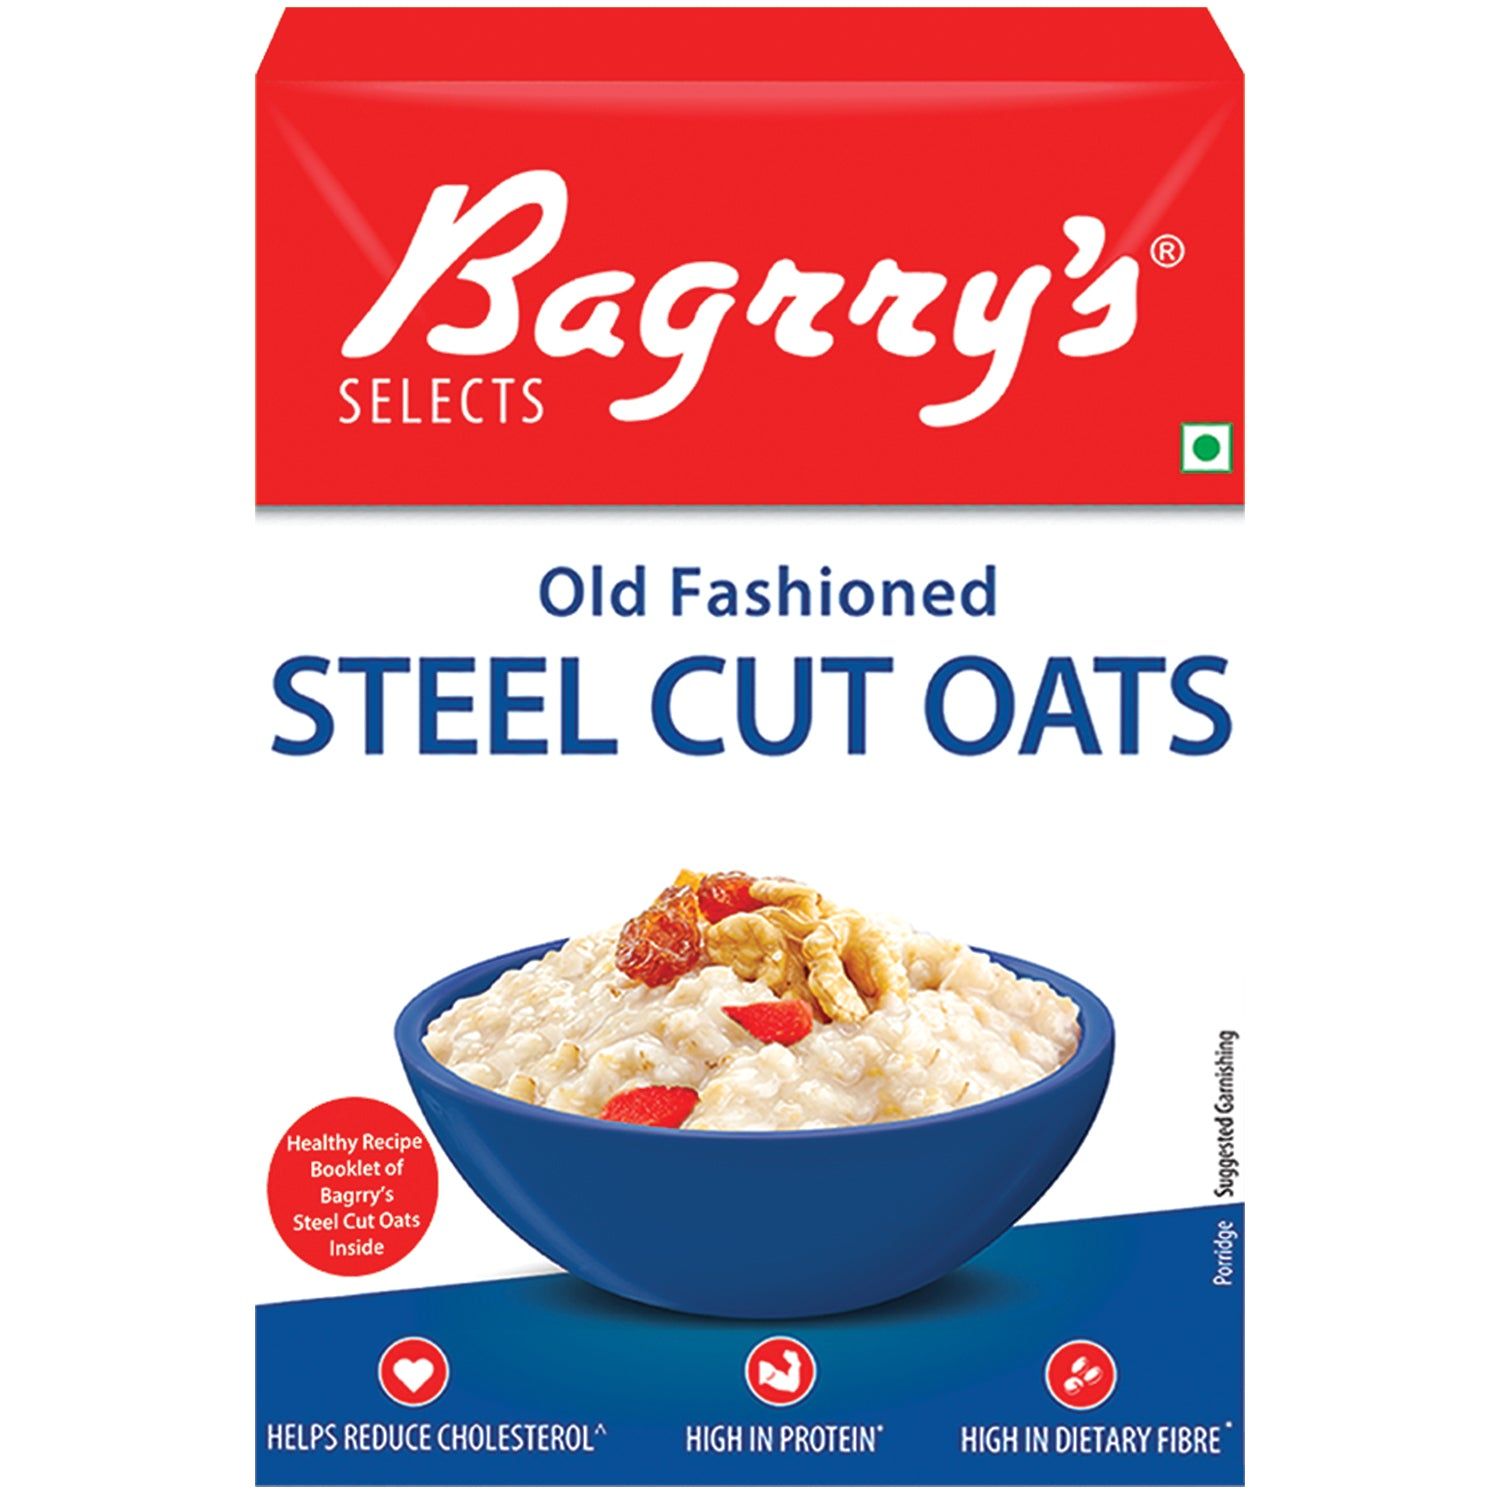 Bagrry's Selects Old Fashioned Steel Cut Oats Image